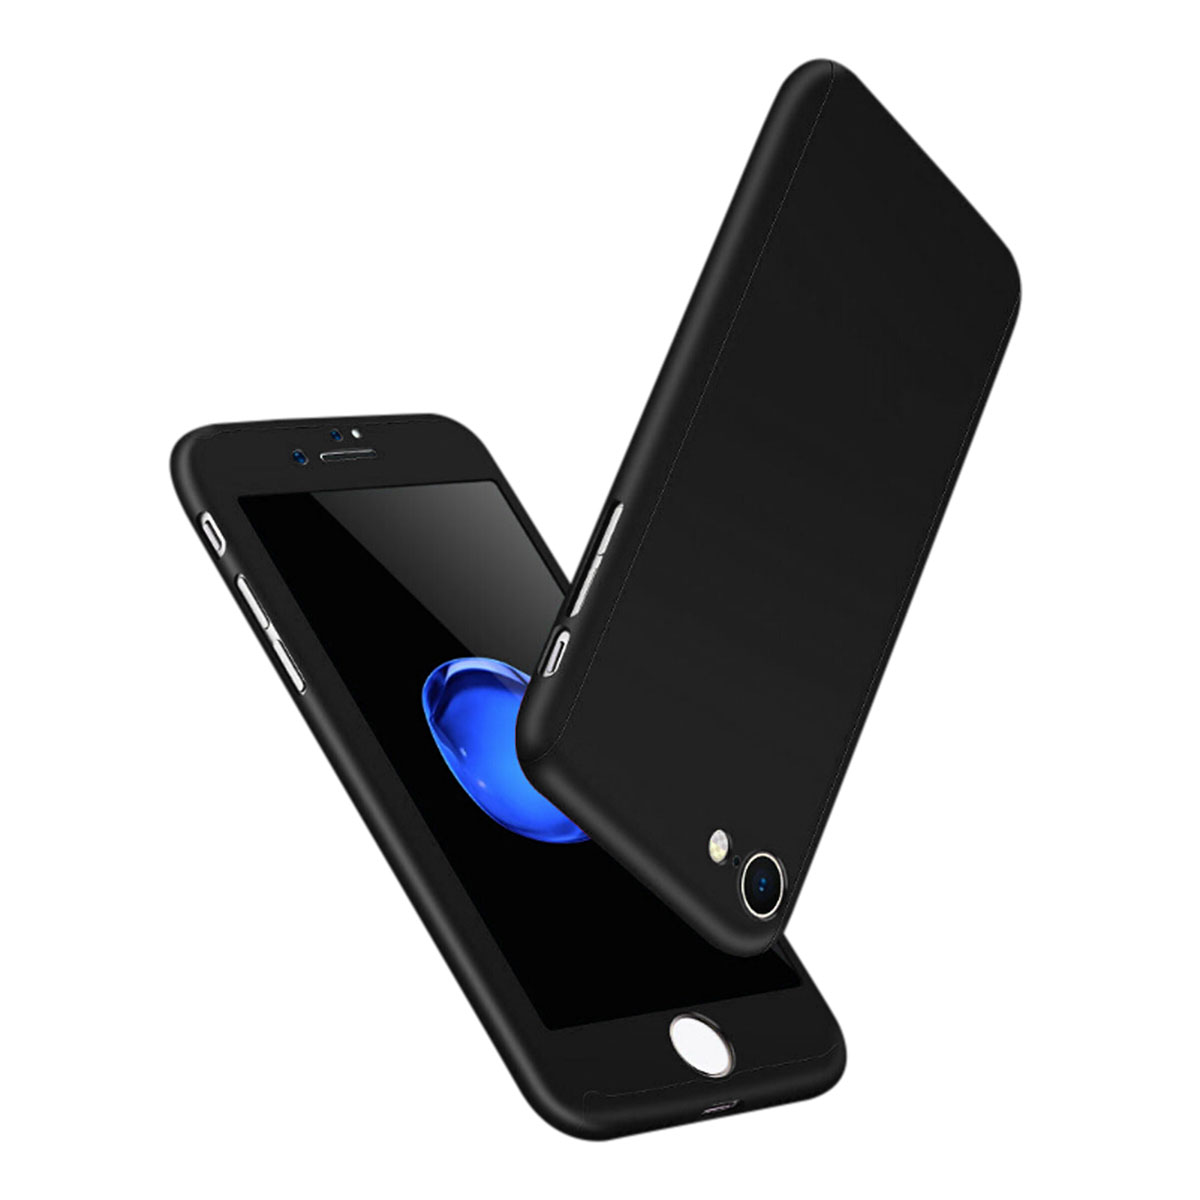 360 Degree Frosted Full Body Coverage Protective Case Cover for iPhone 6 Plus - Black